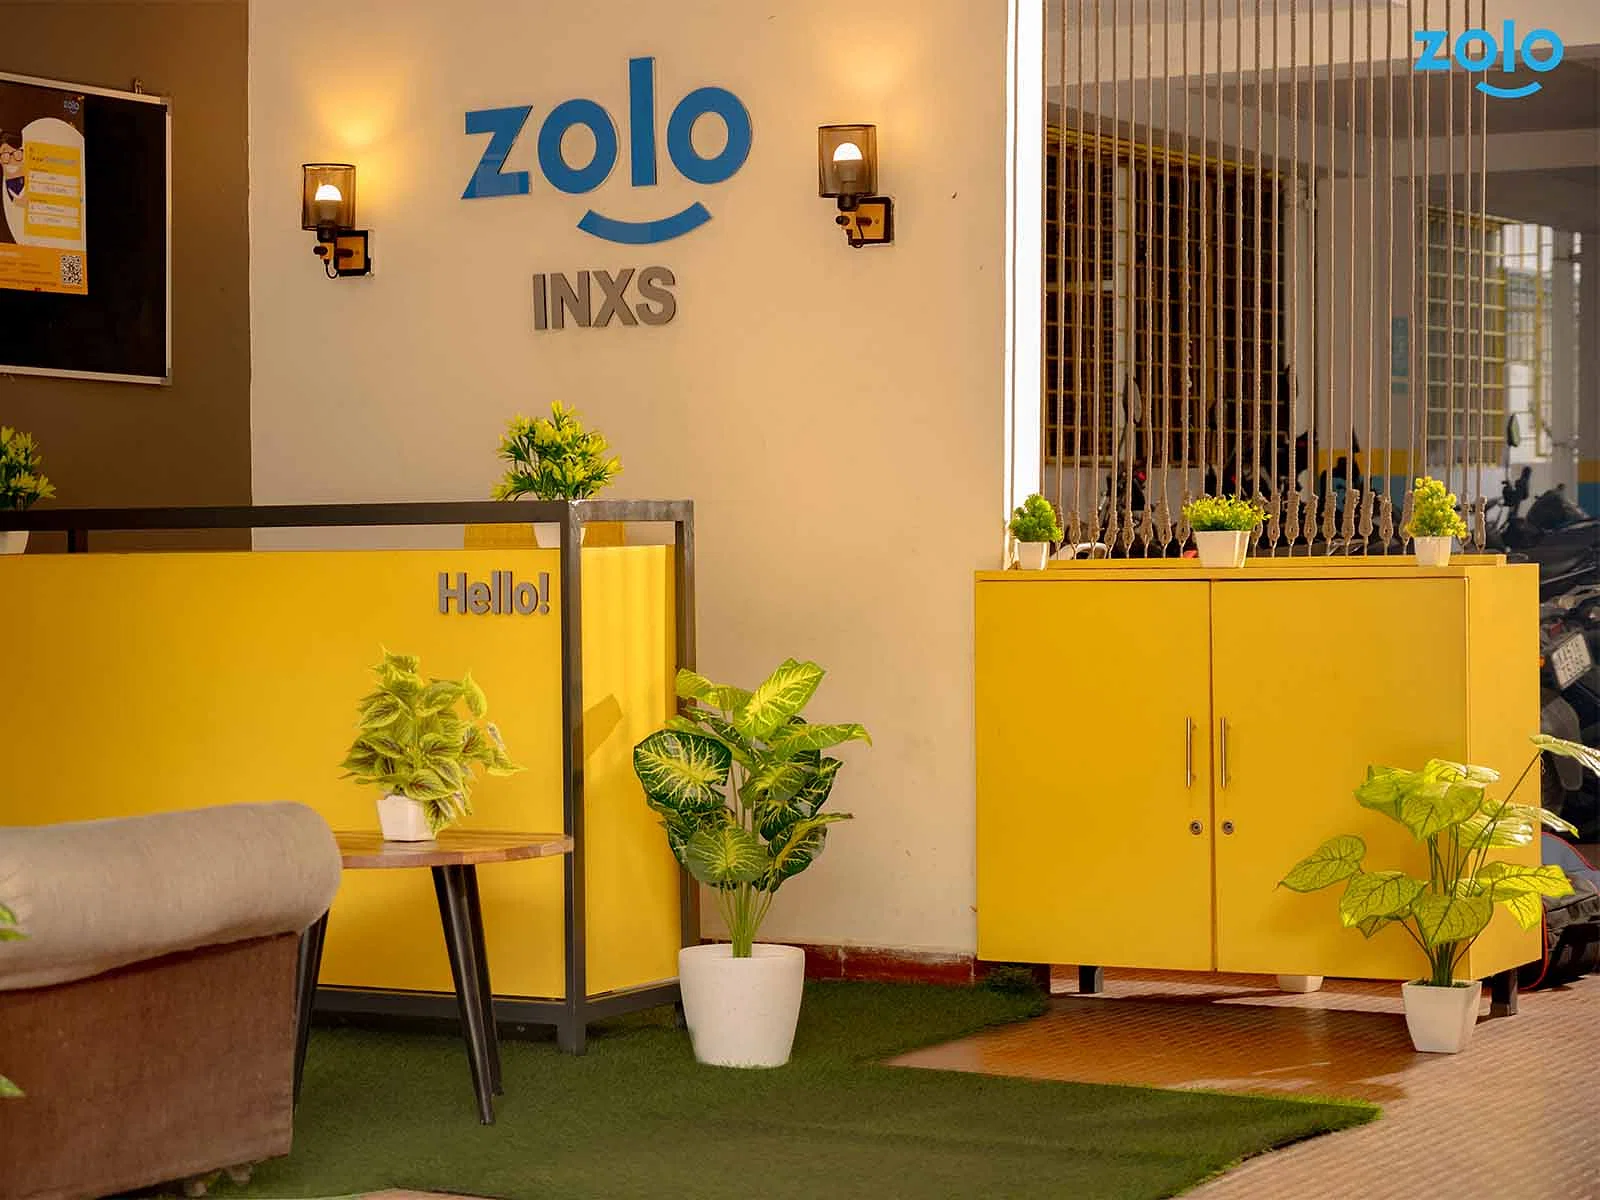 luxury PG accommodations with modern Wi-Fi, AC, and TV in HSR Layout-Bangalore-Zolo Inxs